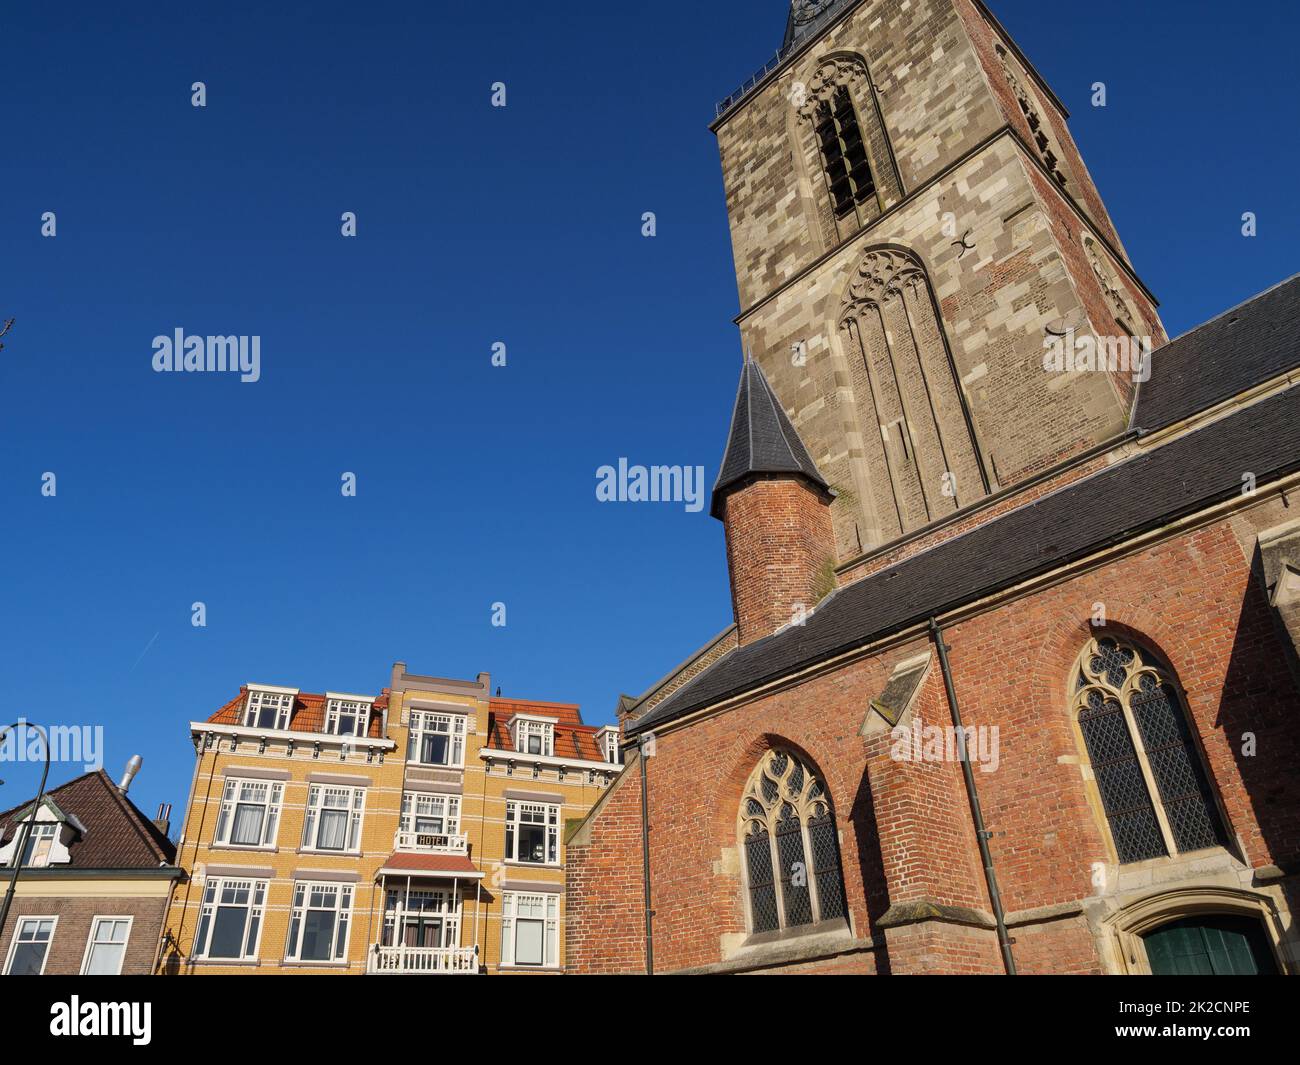 the city of Winterswijk in the Netherlands Stock Photo